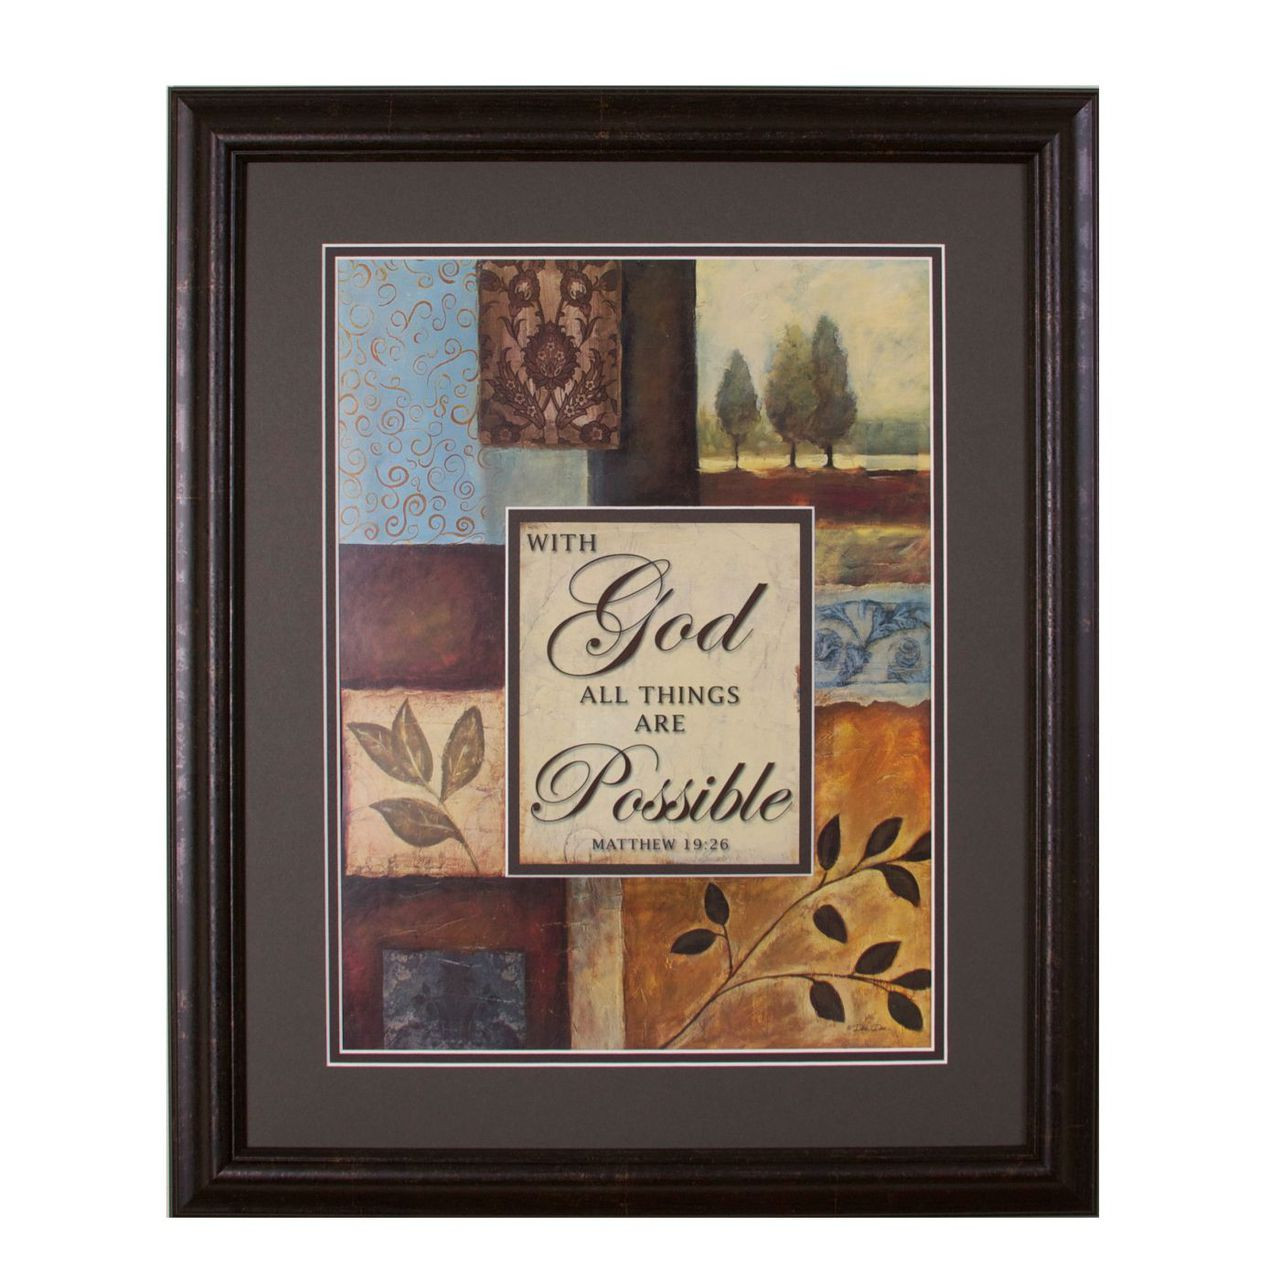 With God Framed & Double Matted Wall Art | Inspirational & Motivational  Shop | Made in the U.S.A. Made in USA